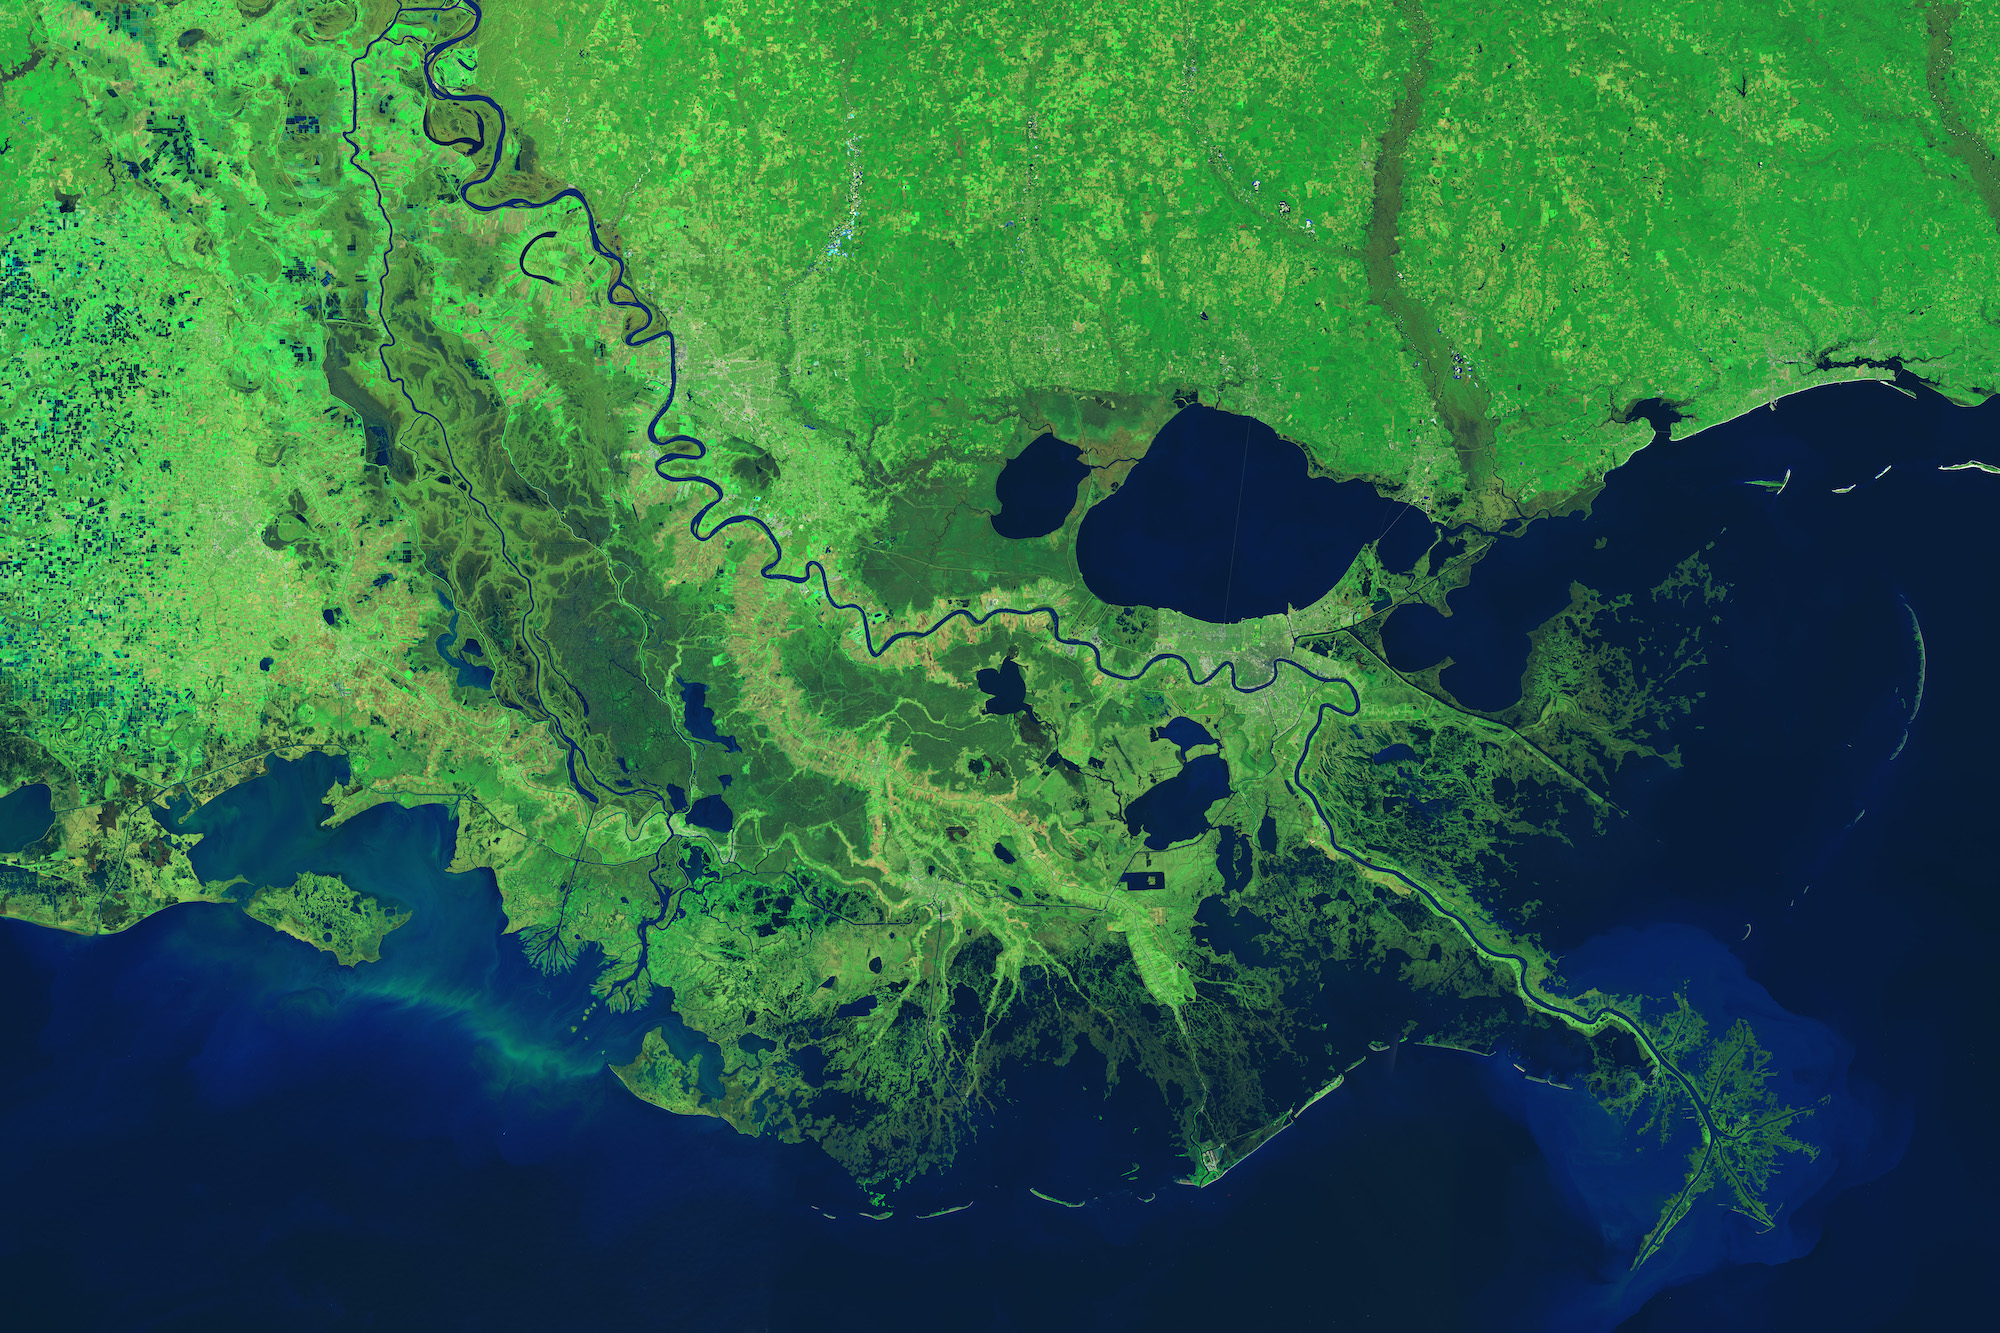 A satellite image of the Mississippi River Delta, with land shown in bright green and water shown in dark blue.